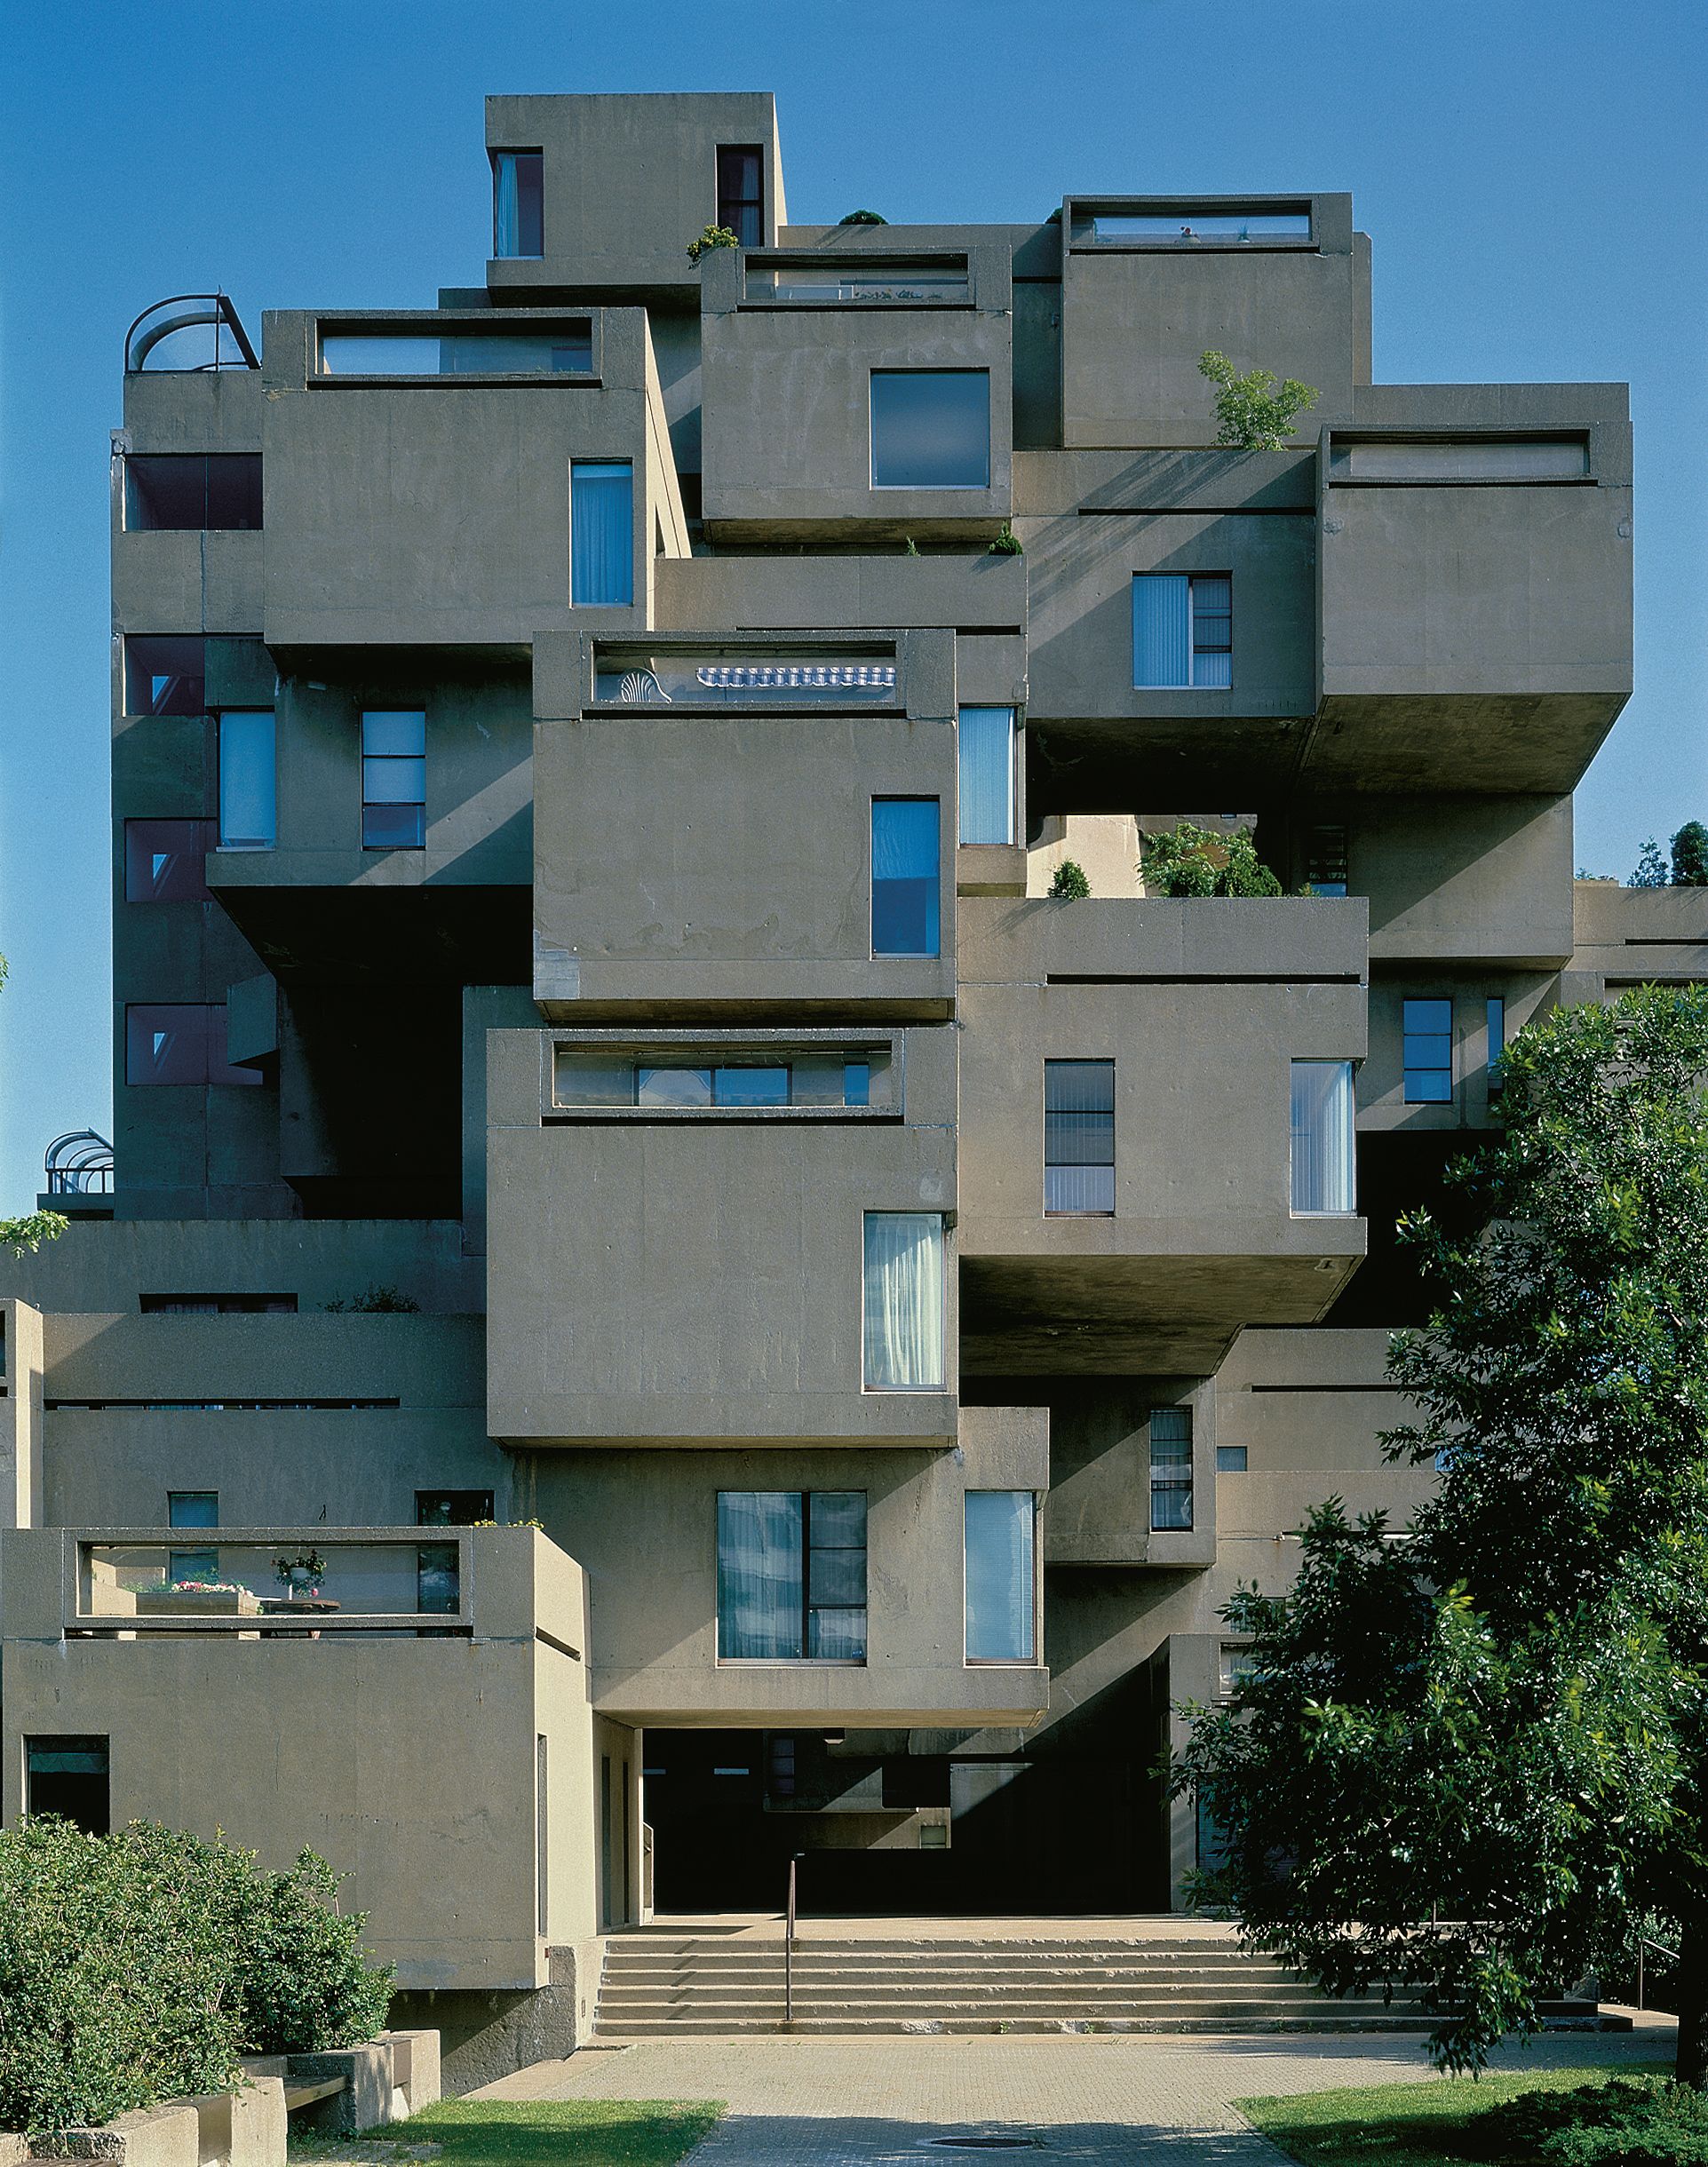 Habitat 67: A once-futuristic housing vision whose time still may come